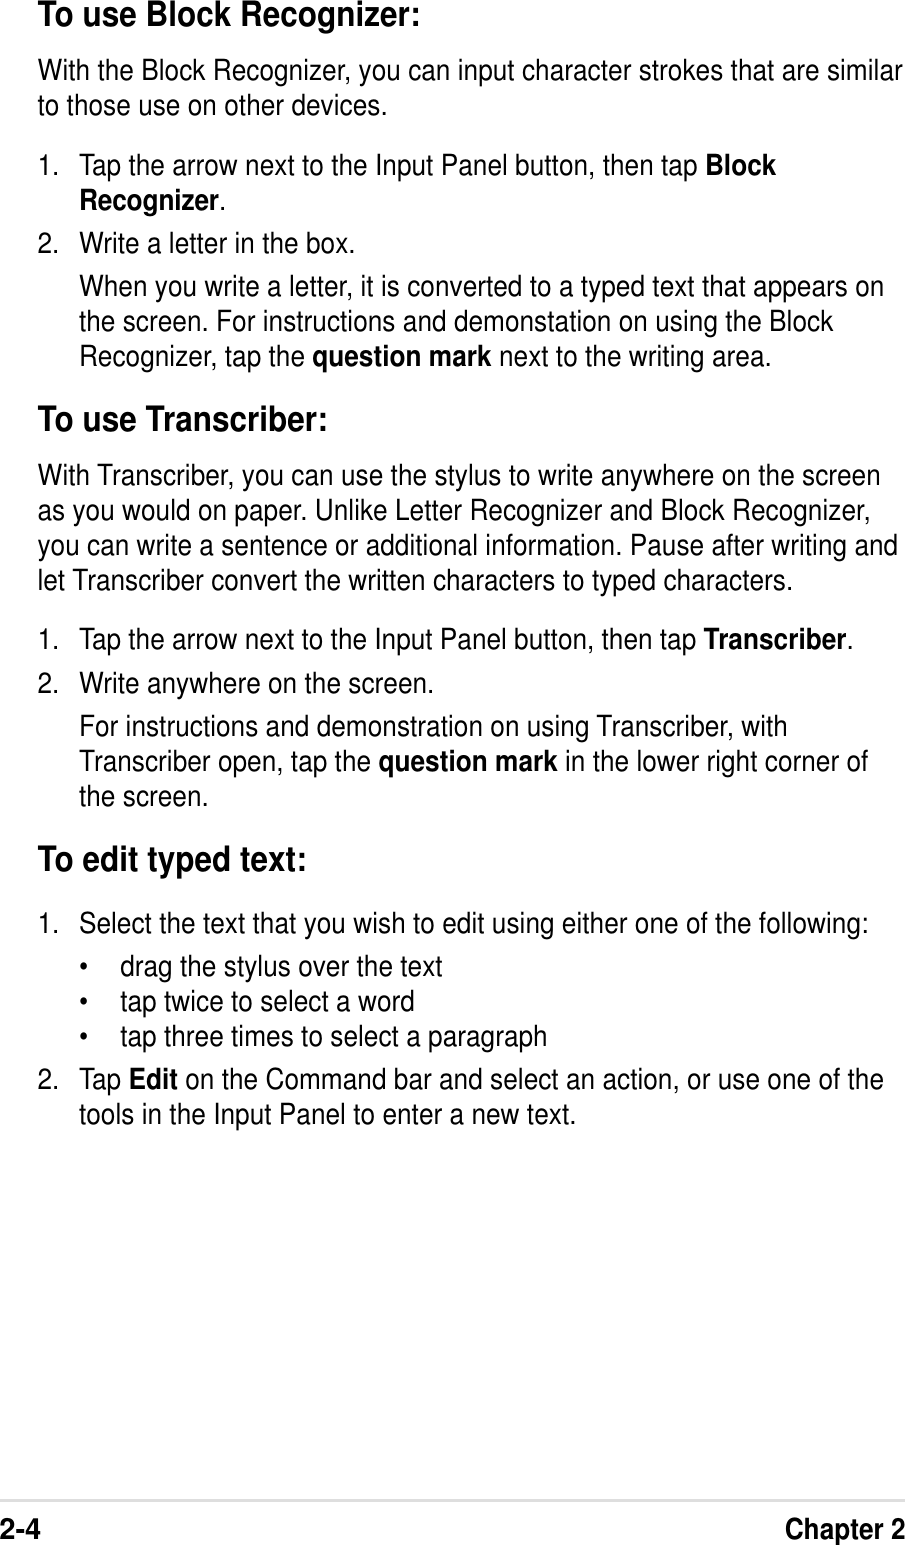 2-4Chapter 2To use Block Recognizer:With the Block Recognizer, you can input character strokes that are similarto those use on other devices.1. Tap the arrow next to the Input Panel button, then tap BlockRecognizer.2. Write a letter in the box.When you write a letter, it is converted to a typed text that appears onthe screen. For instructions and demonstation on using the BlockRecognizer, tap the question mark next to the writing area.To use Transcriber:With Transcriber, you can use the stylus to write anywhere on the screenas you would on paper. Unlike Letter Recognizer and Block Recognizer,you can write a sentence or additional information. Pause after writing andlet Transcriber convert the written characters to typed characters.1. Tap the arrow next to the Input Panel button, then tap Transcriber.2. Write anywhere on the screen.For instructions and demonstration on using Transcriber, withTranscriber open, tap the question mark in the lower right corner ofthe screen.To edit typed text:1. Select the text that you wish to edit using either one of the following:• drag the stylus over the text• tap twice to select a word• tap three times to select a paragraph2. Tap Edit on the Command bar and select an action, or use one of thetools in the Input Panel to enter a new text.